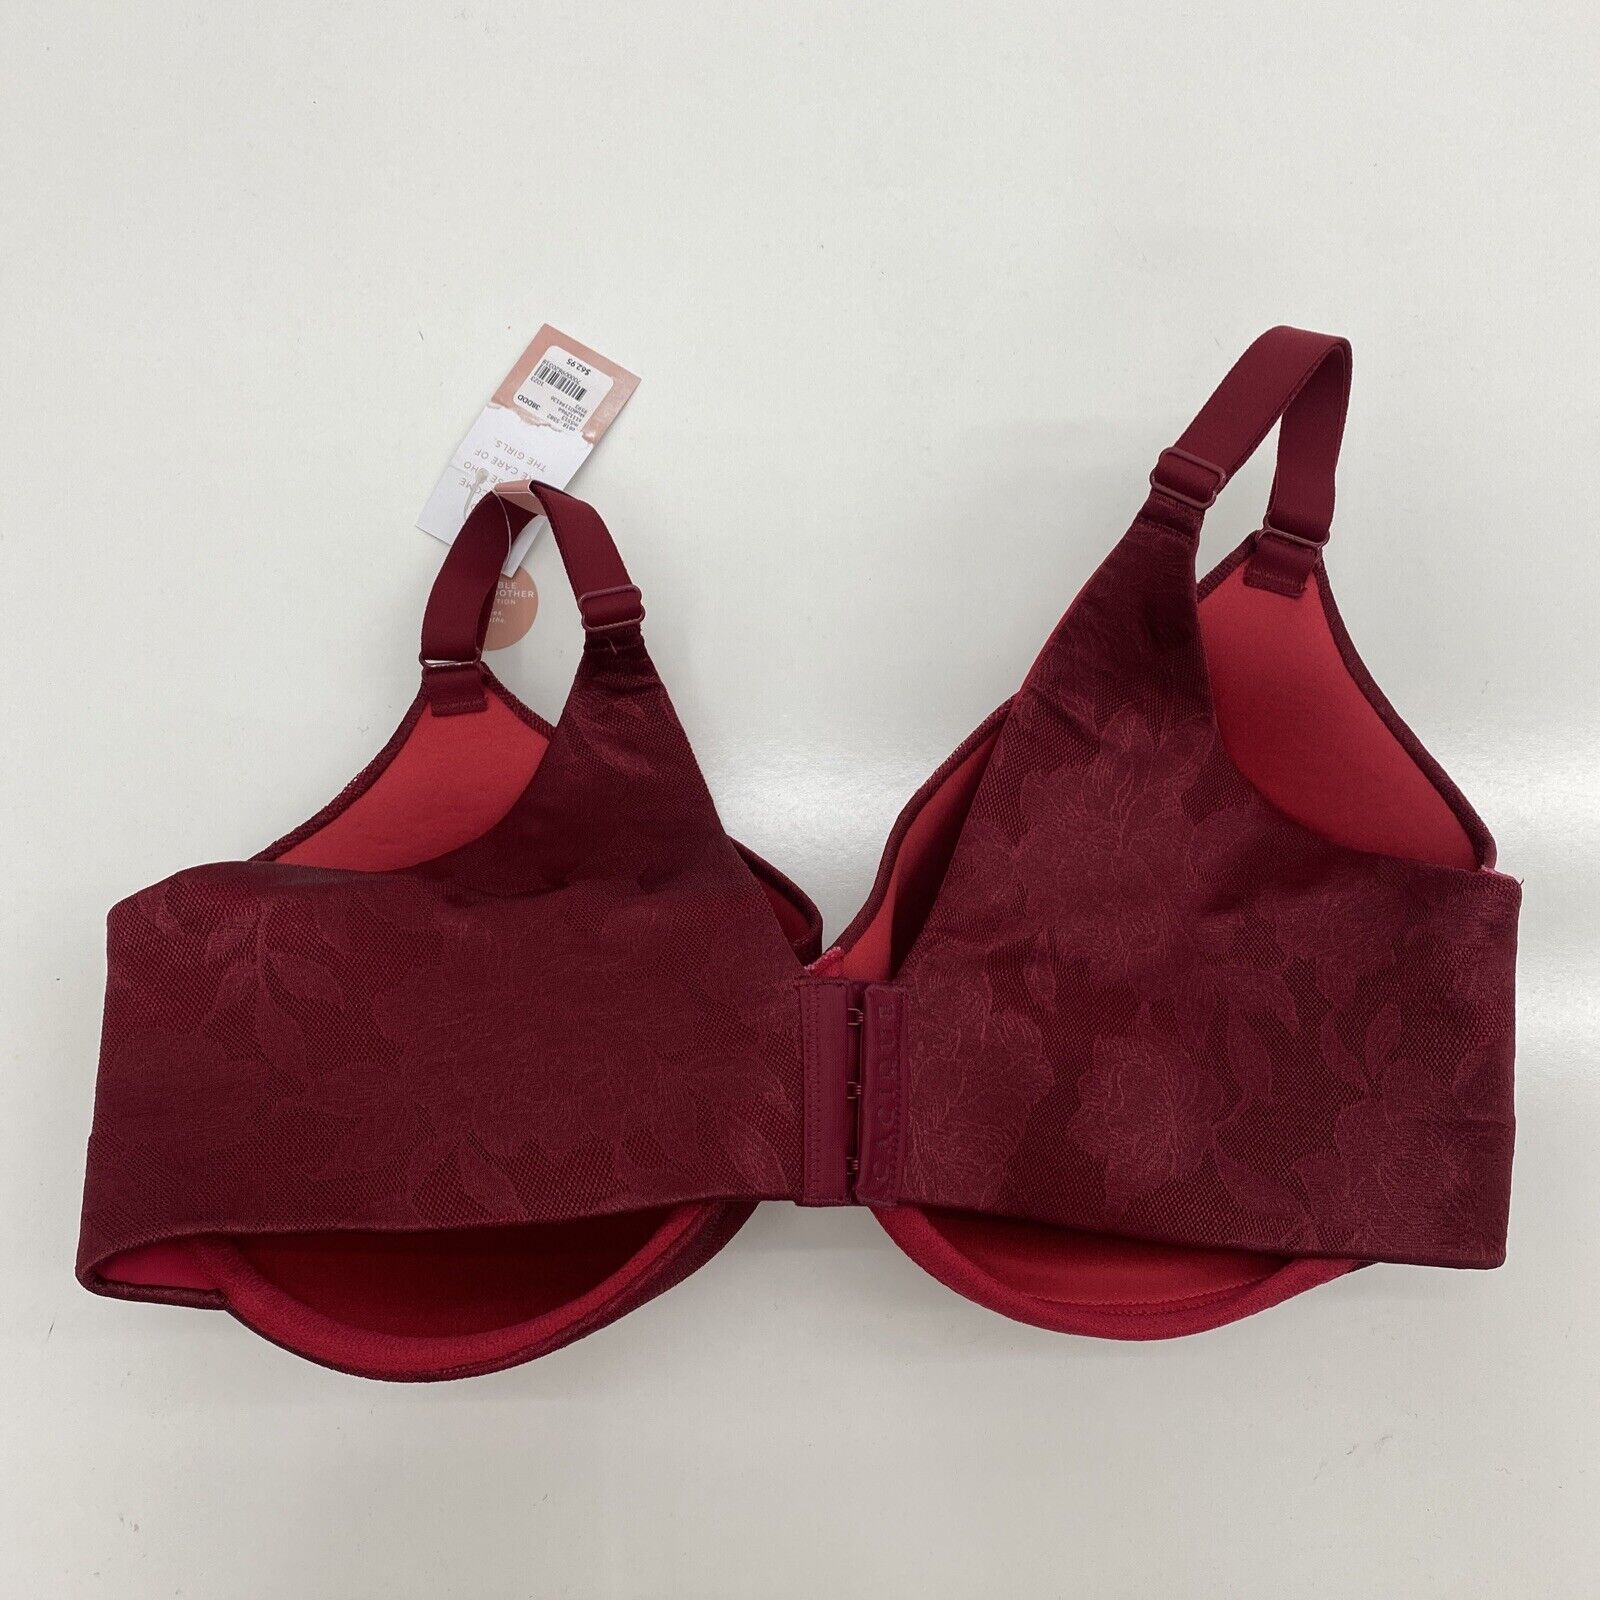 Cacique Invisible BackSmoother Lightly Lined Full Coverage Bra Red Siz -  beyond exchange